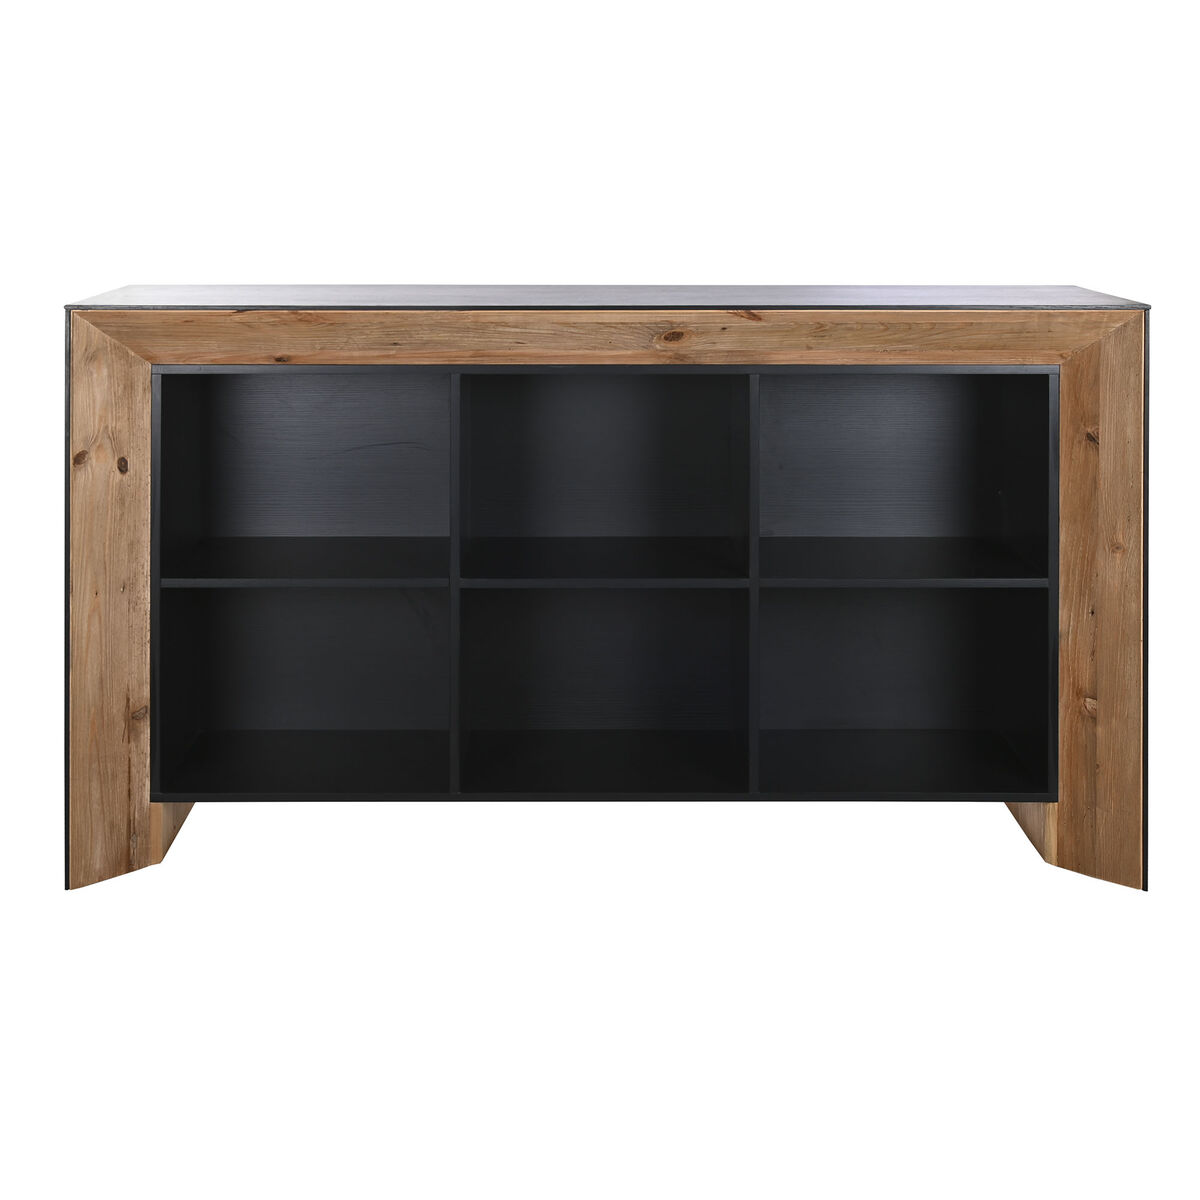 Sideboard DKD Home Decor Brown Black Pinewood Recycled Wood 182 x 50 x 107